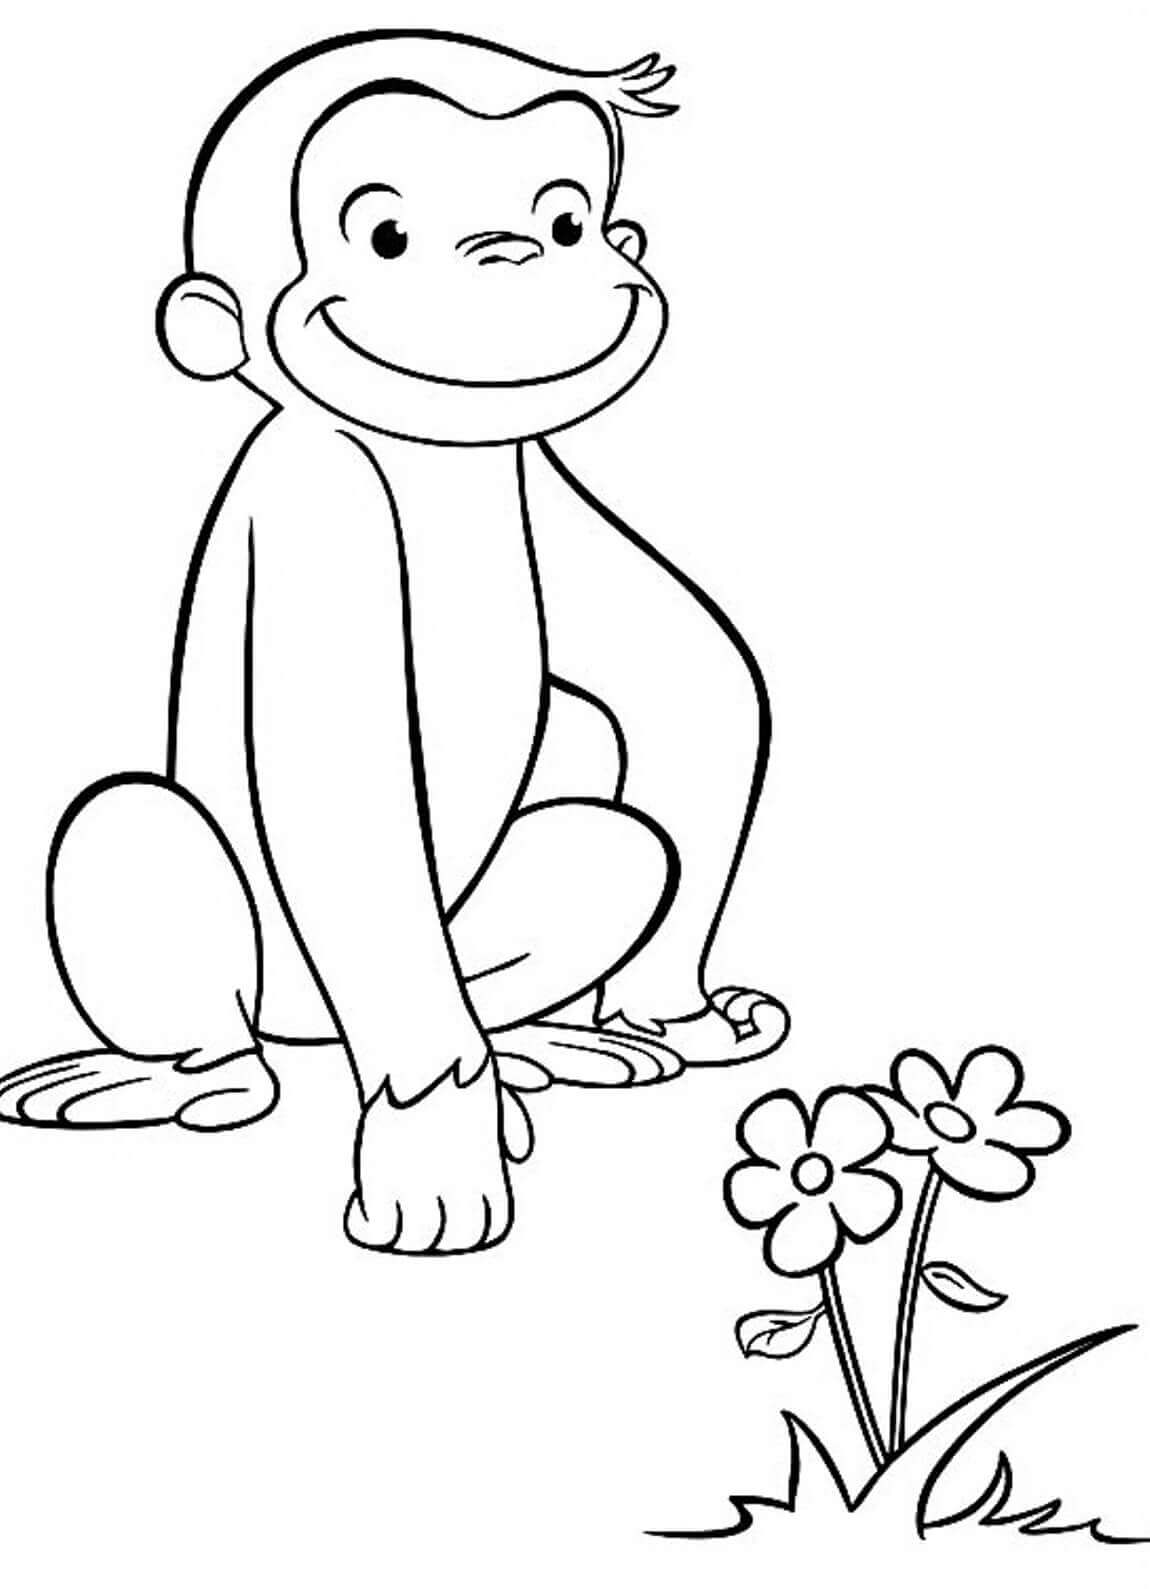 Spring Curious George Coloring Page